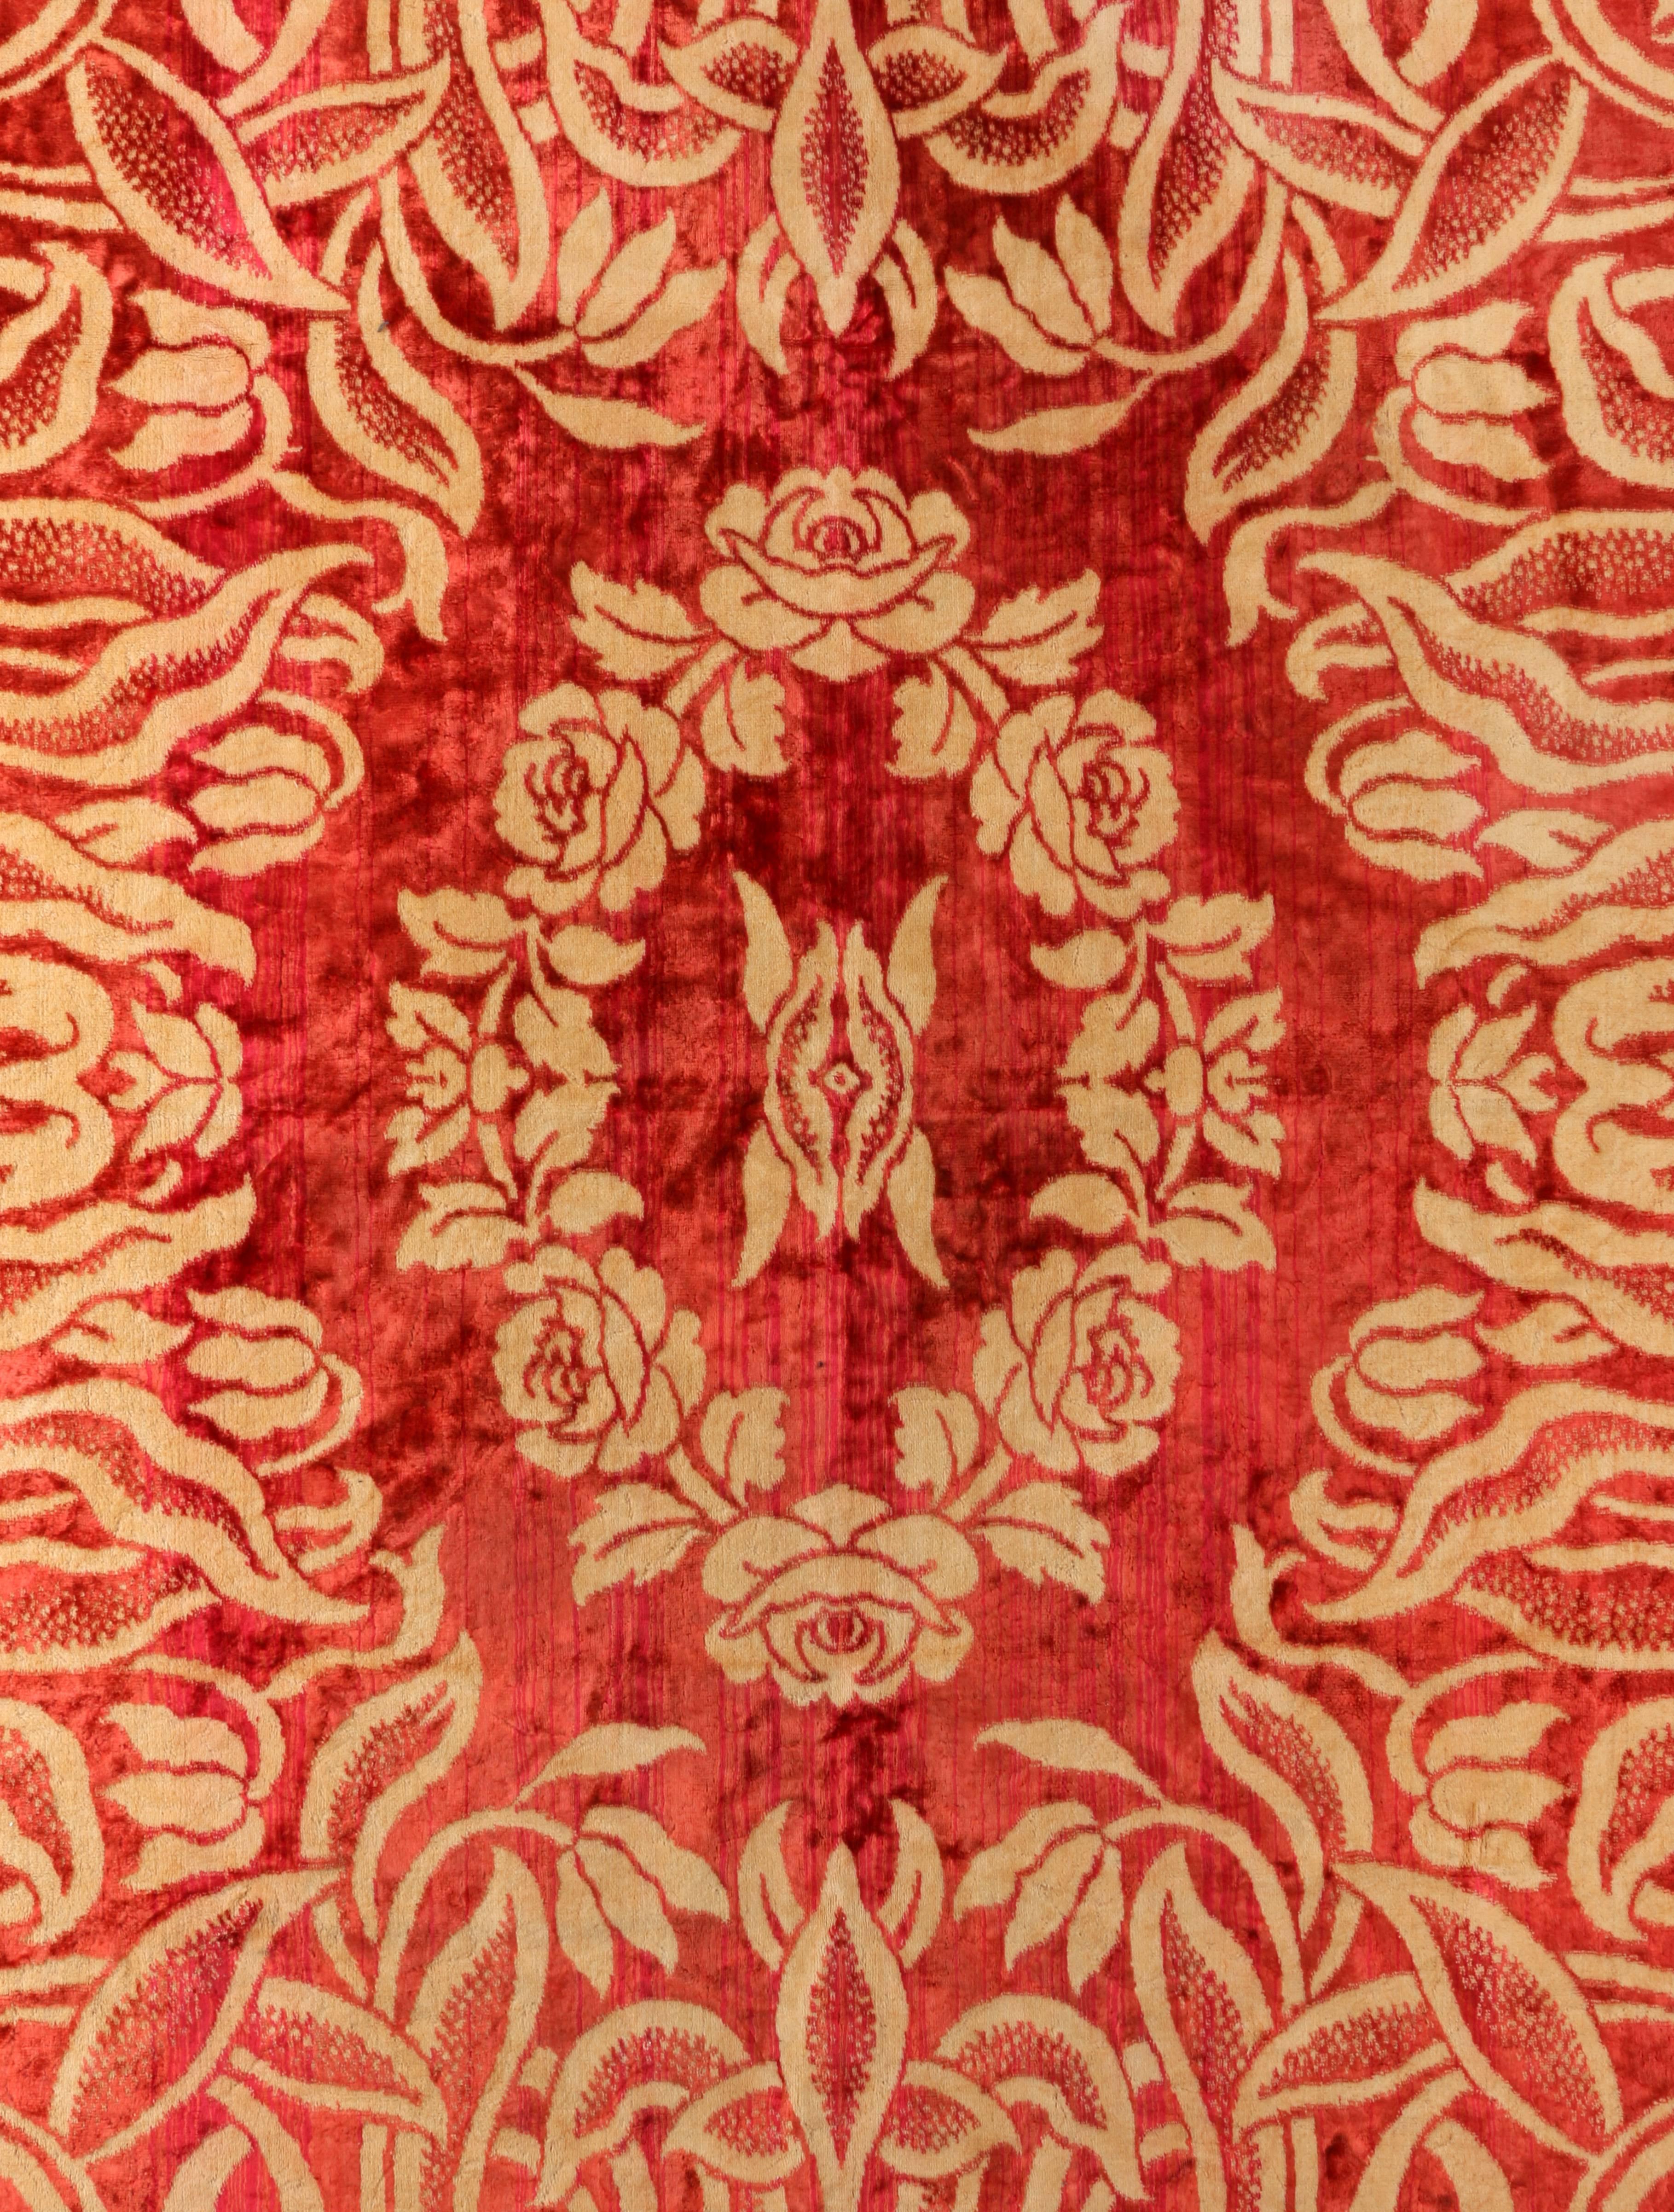 Vintage Edwardian c.1910's art nouveau style red and soft gold floral patterned velvet fringed bedspread / throw. Rose pattern boarder with solid soft gold outer edge. Interior floral motif with central rose pattern and dual solid rectangular